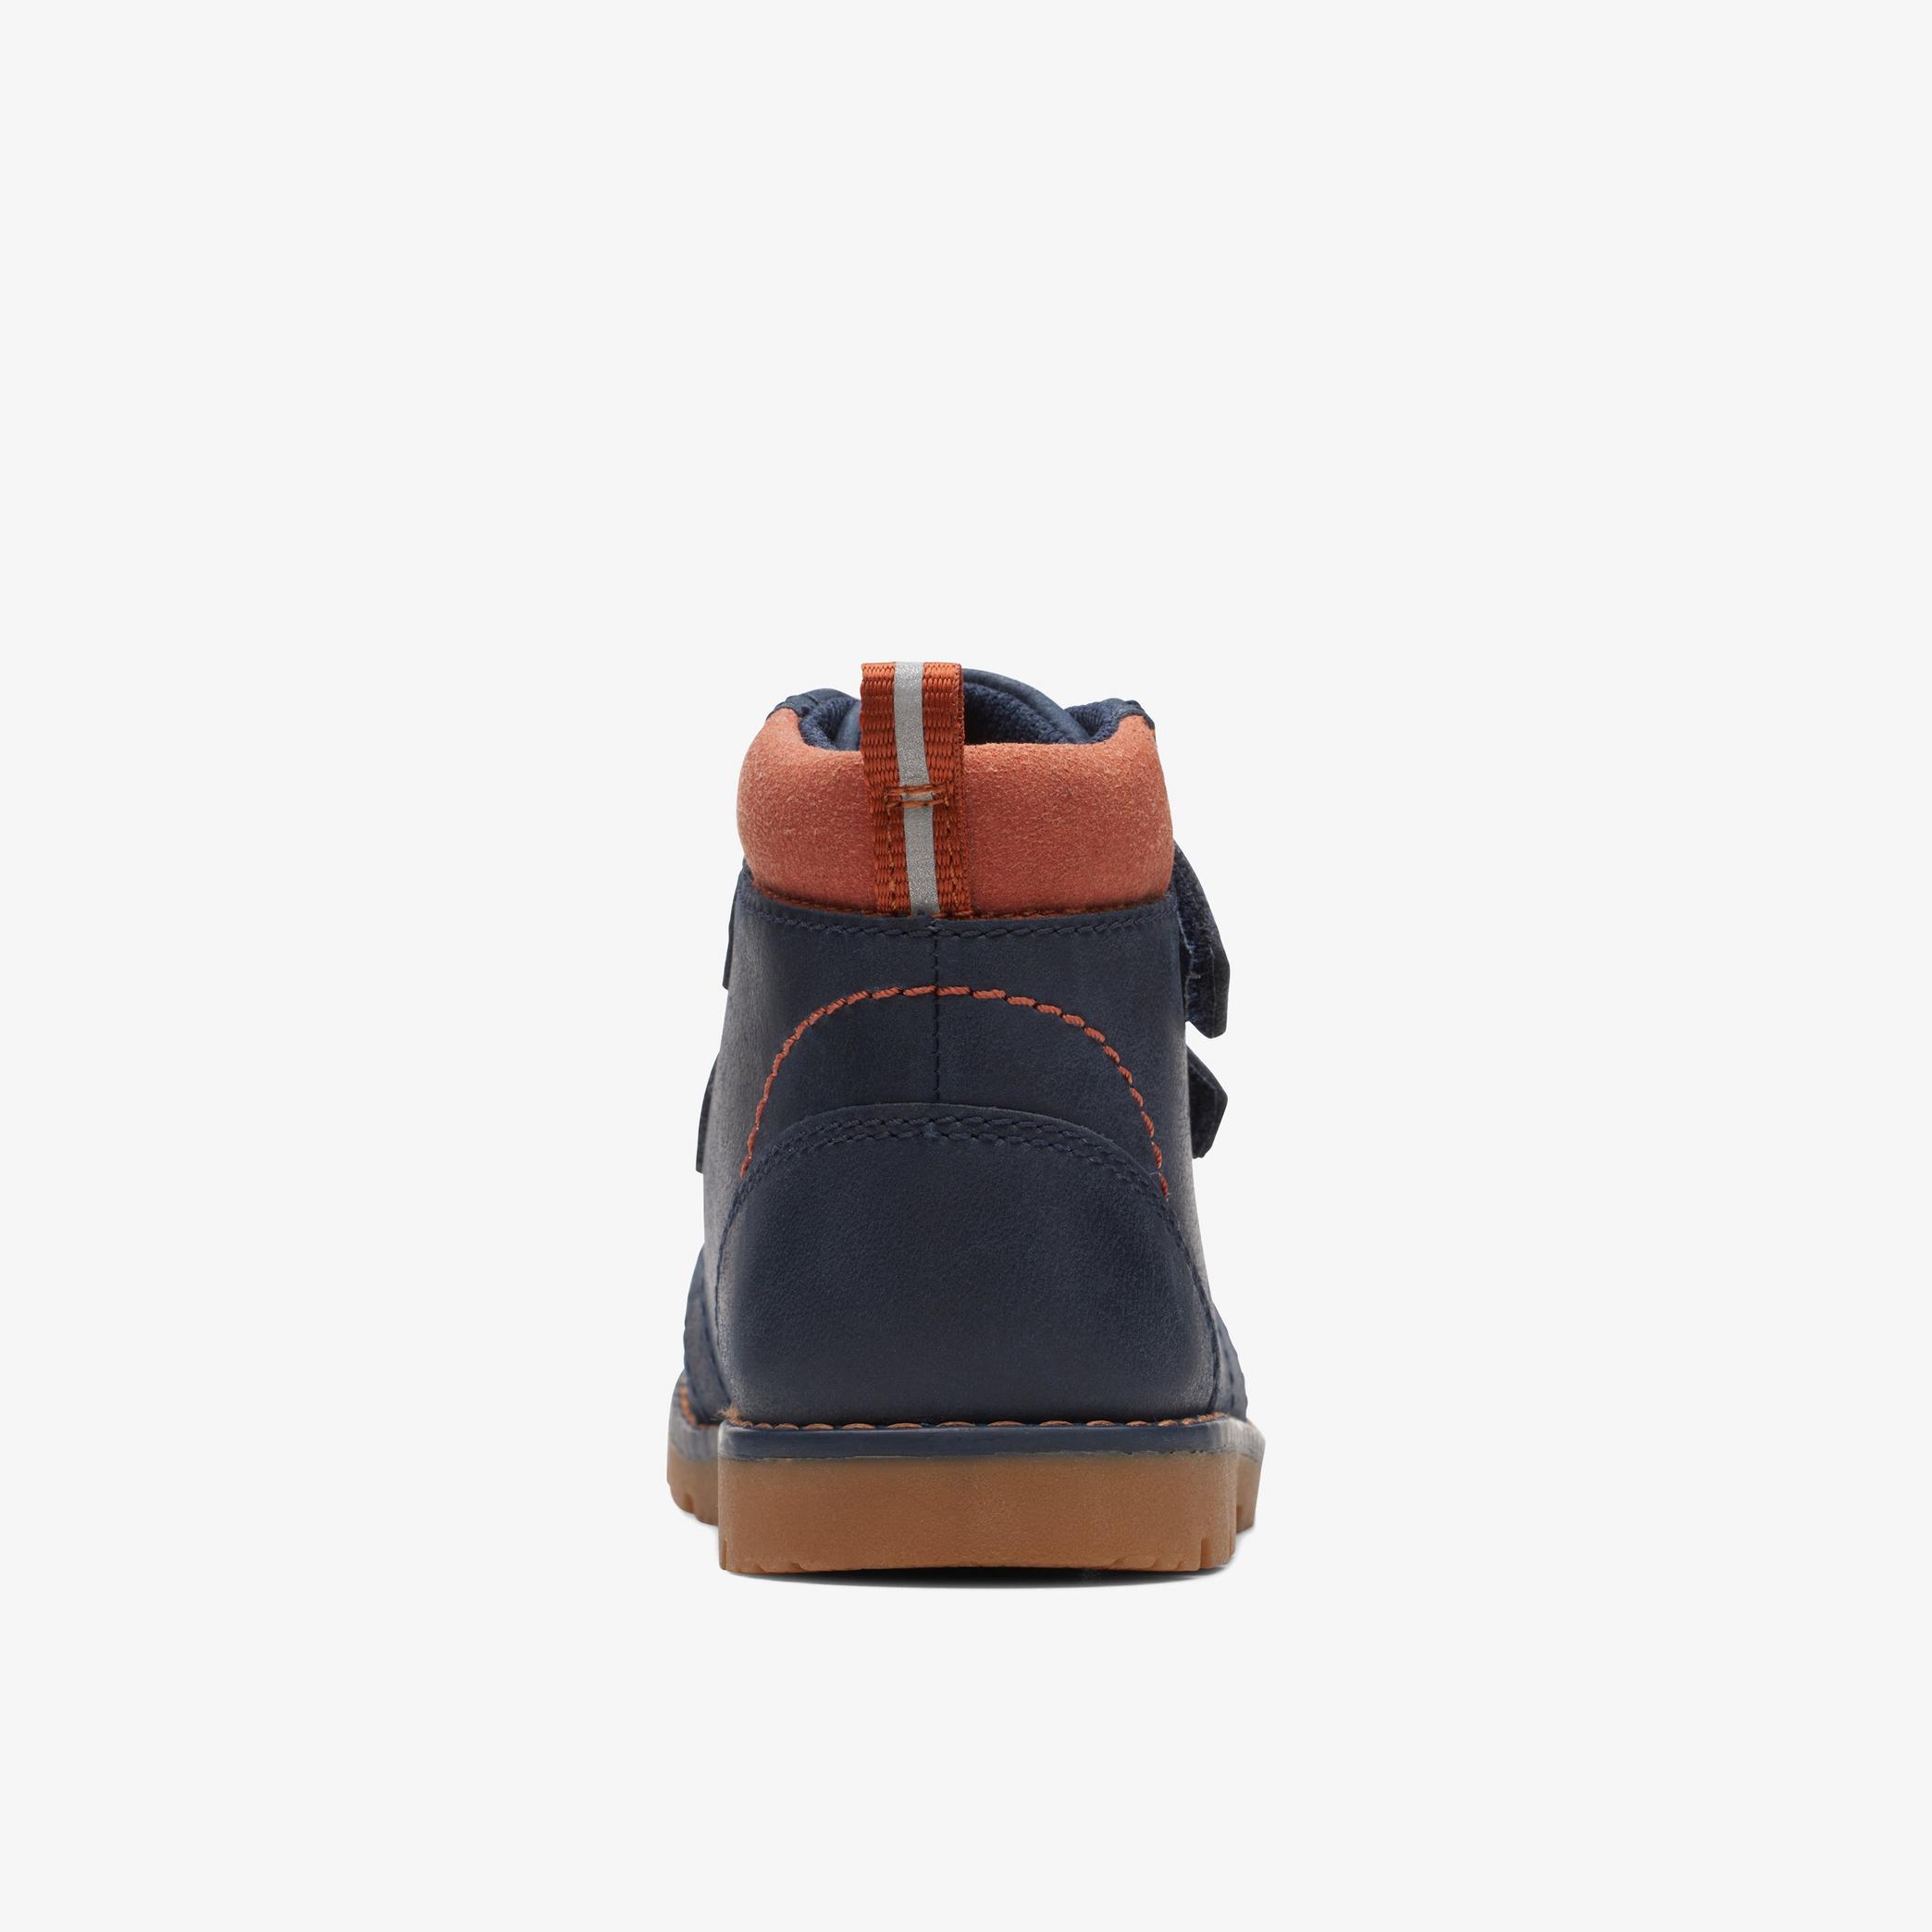 Heath Strap Toddler Navy Ankle Boots, view 5 of 6